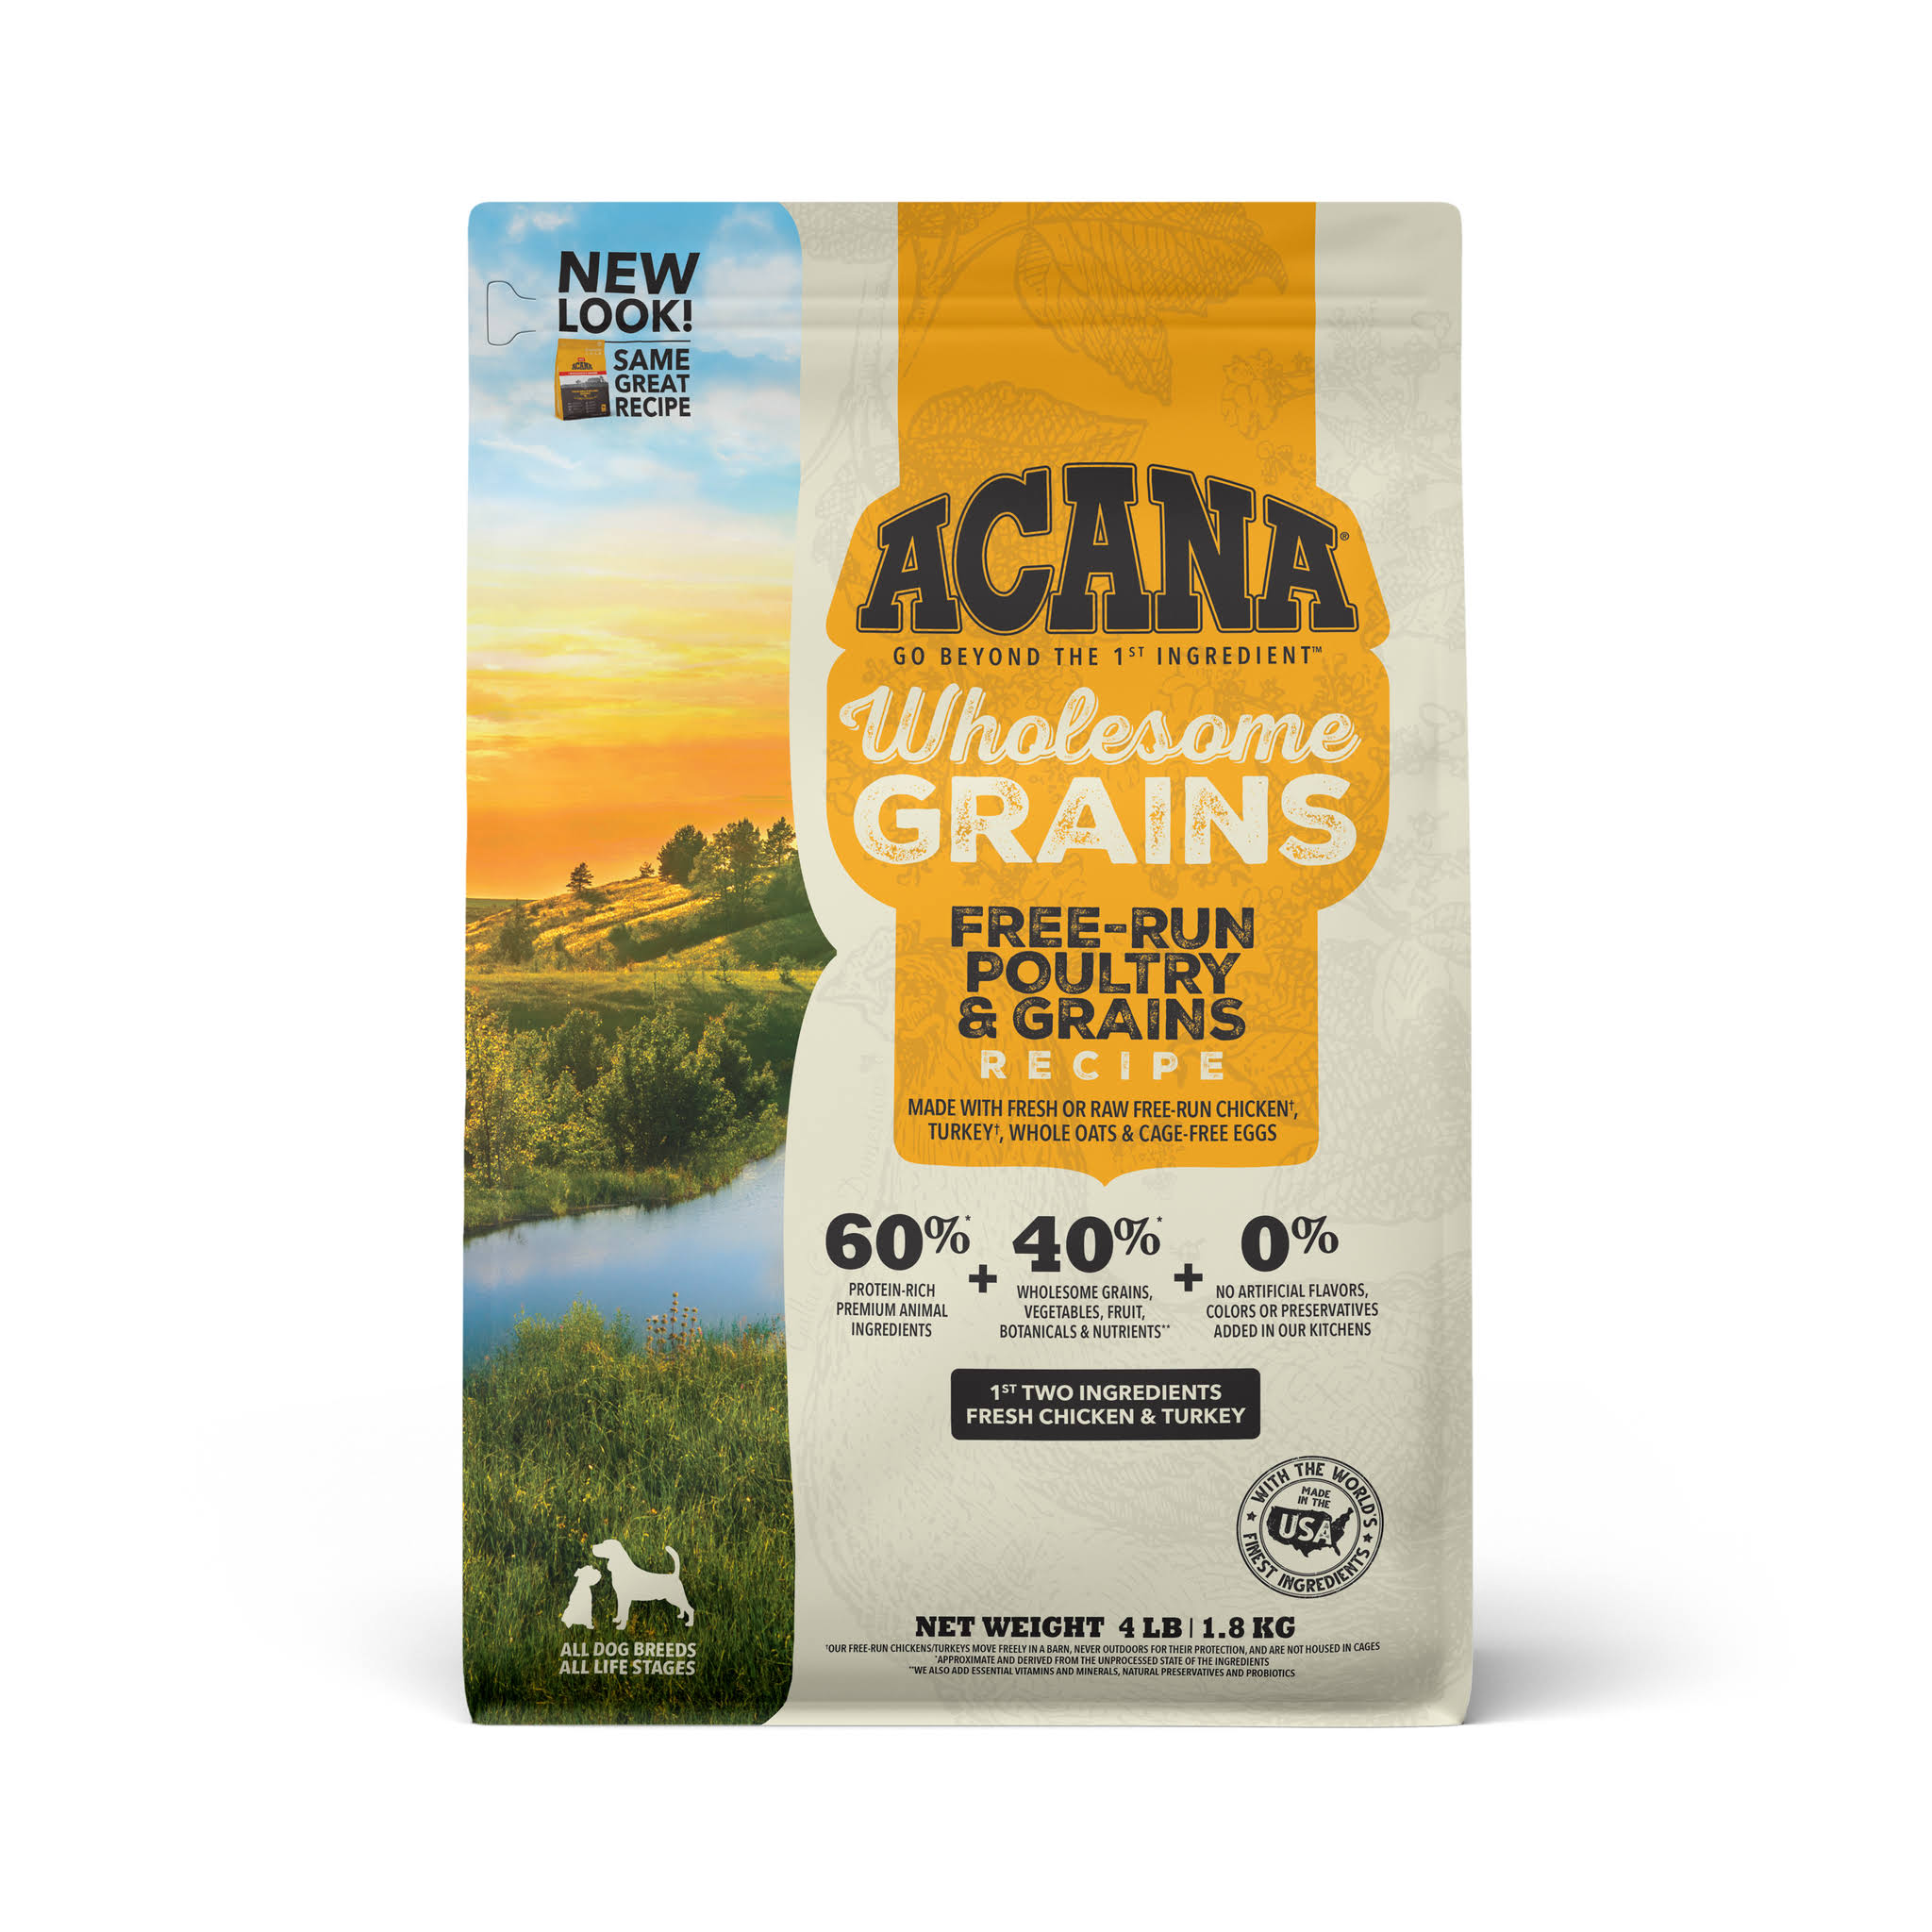 Acana Wholesome Grains Free-Run Poultry & Grains Recipe Dry Dog Food - 4 lb. Bag